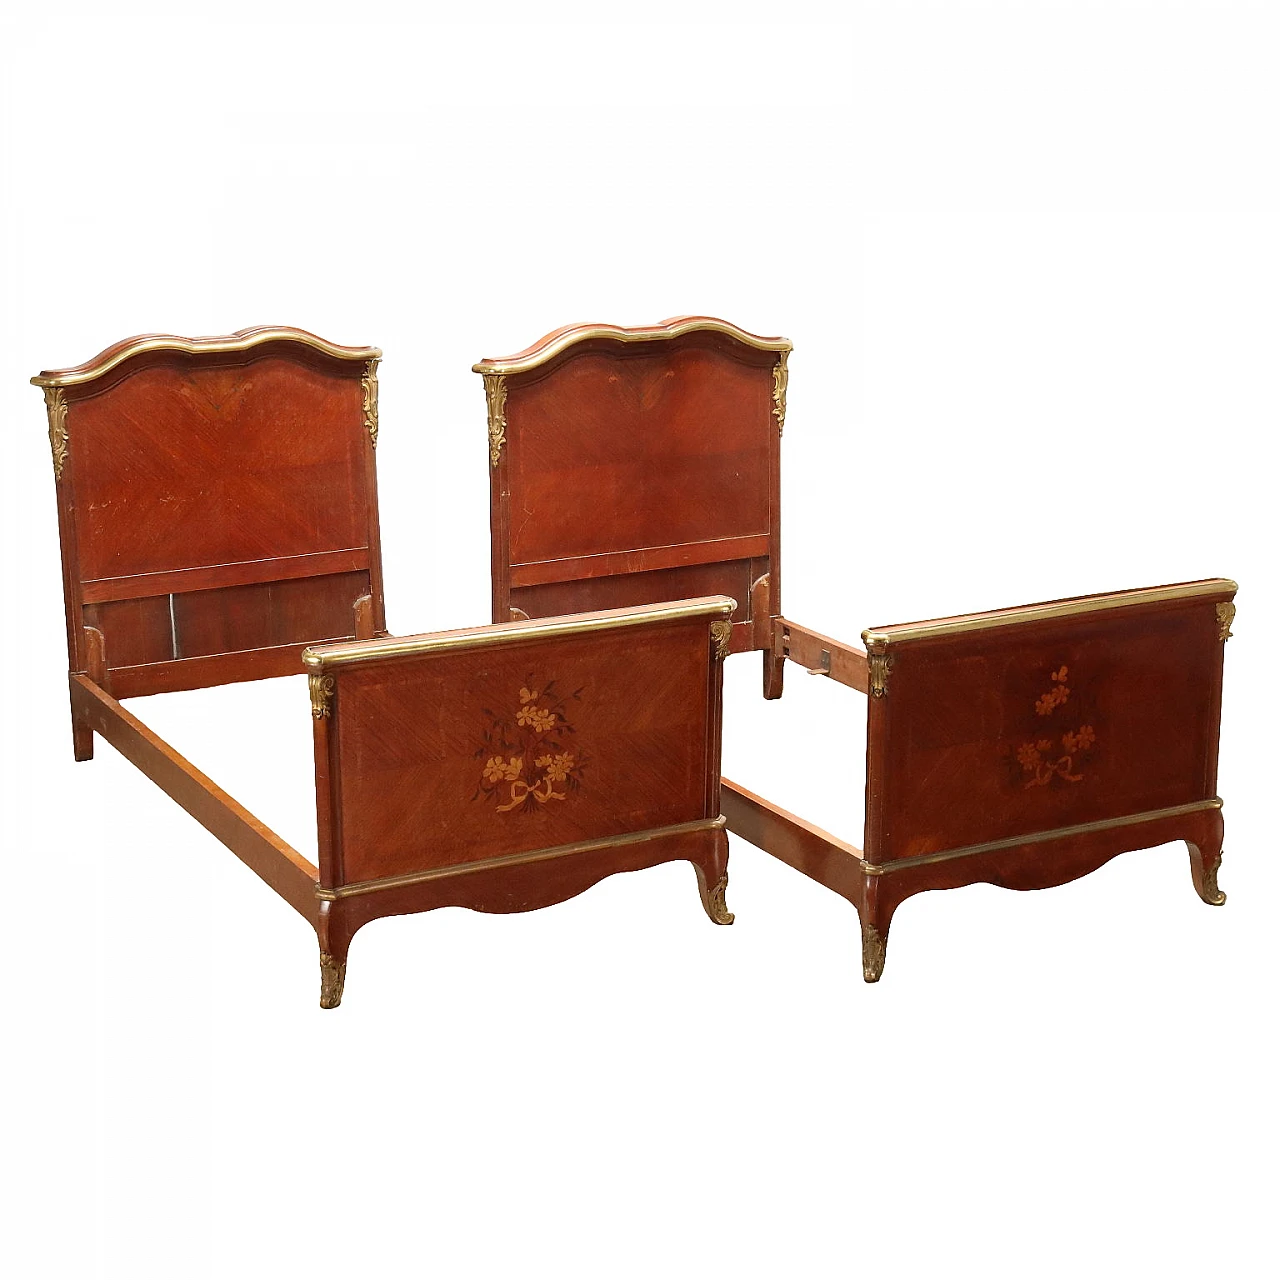 Pair of mahogany bed frames with bronze and brass details 1